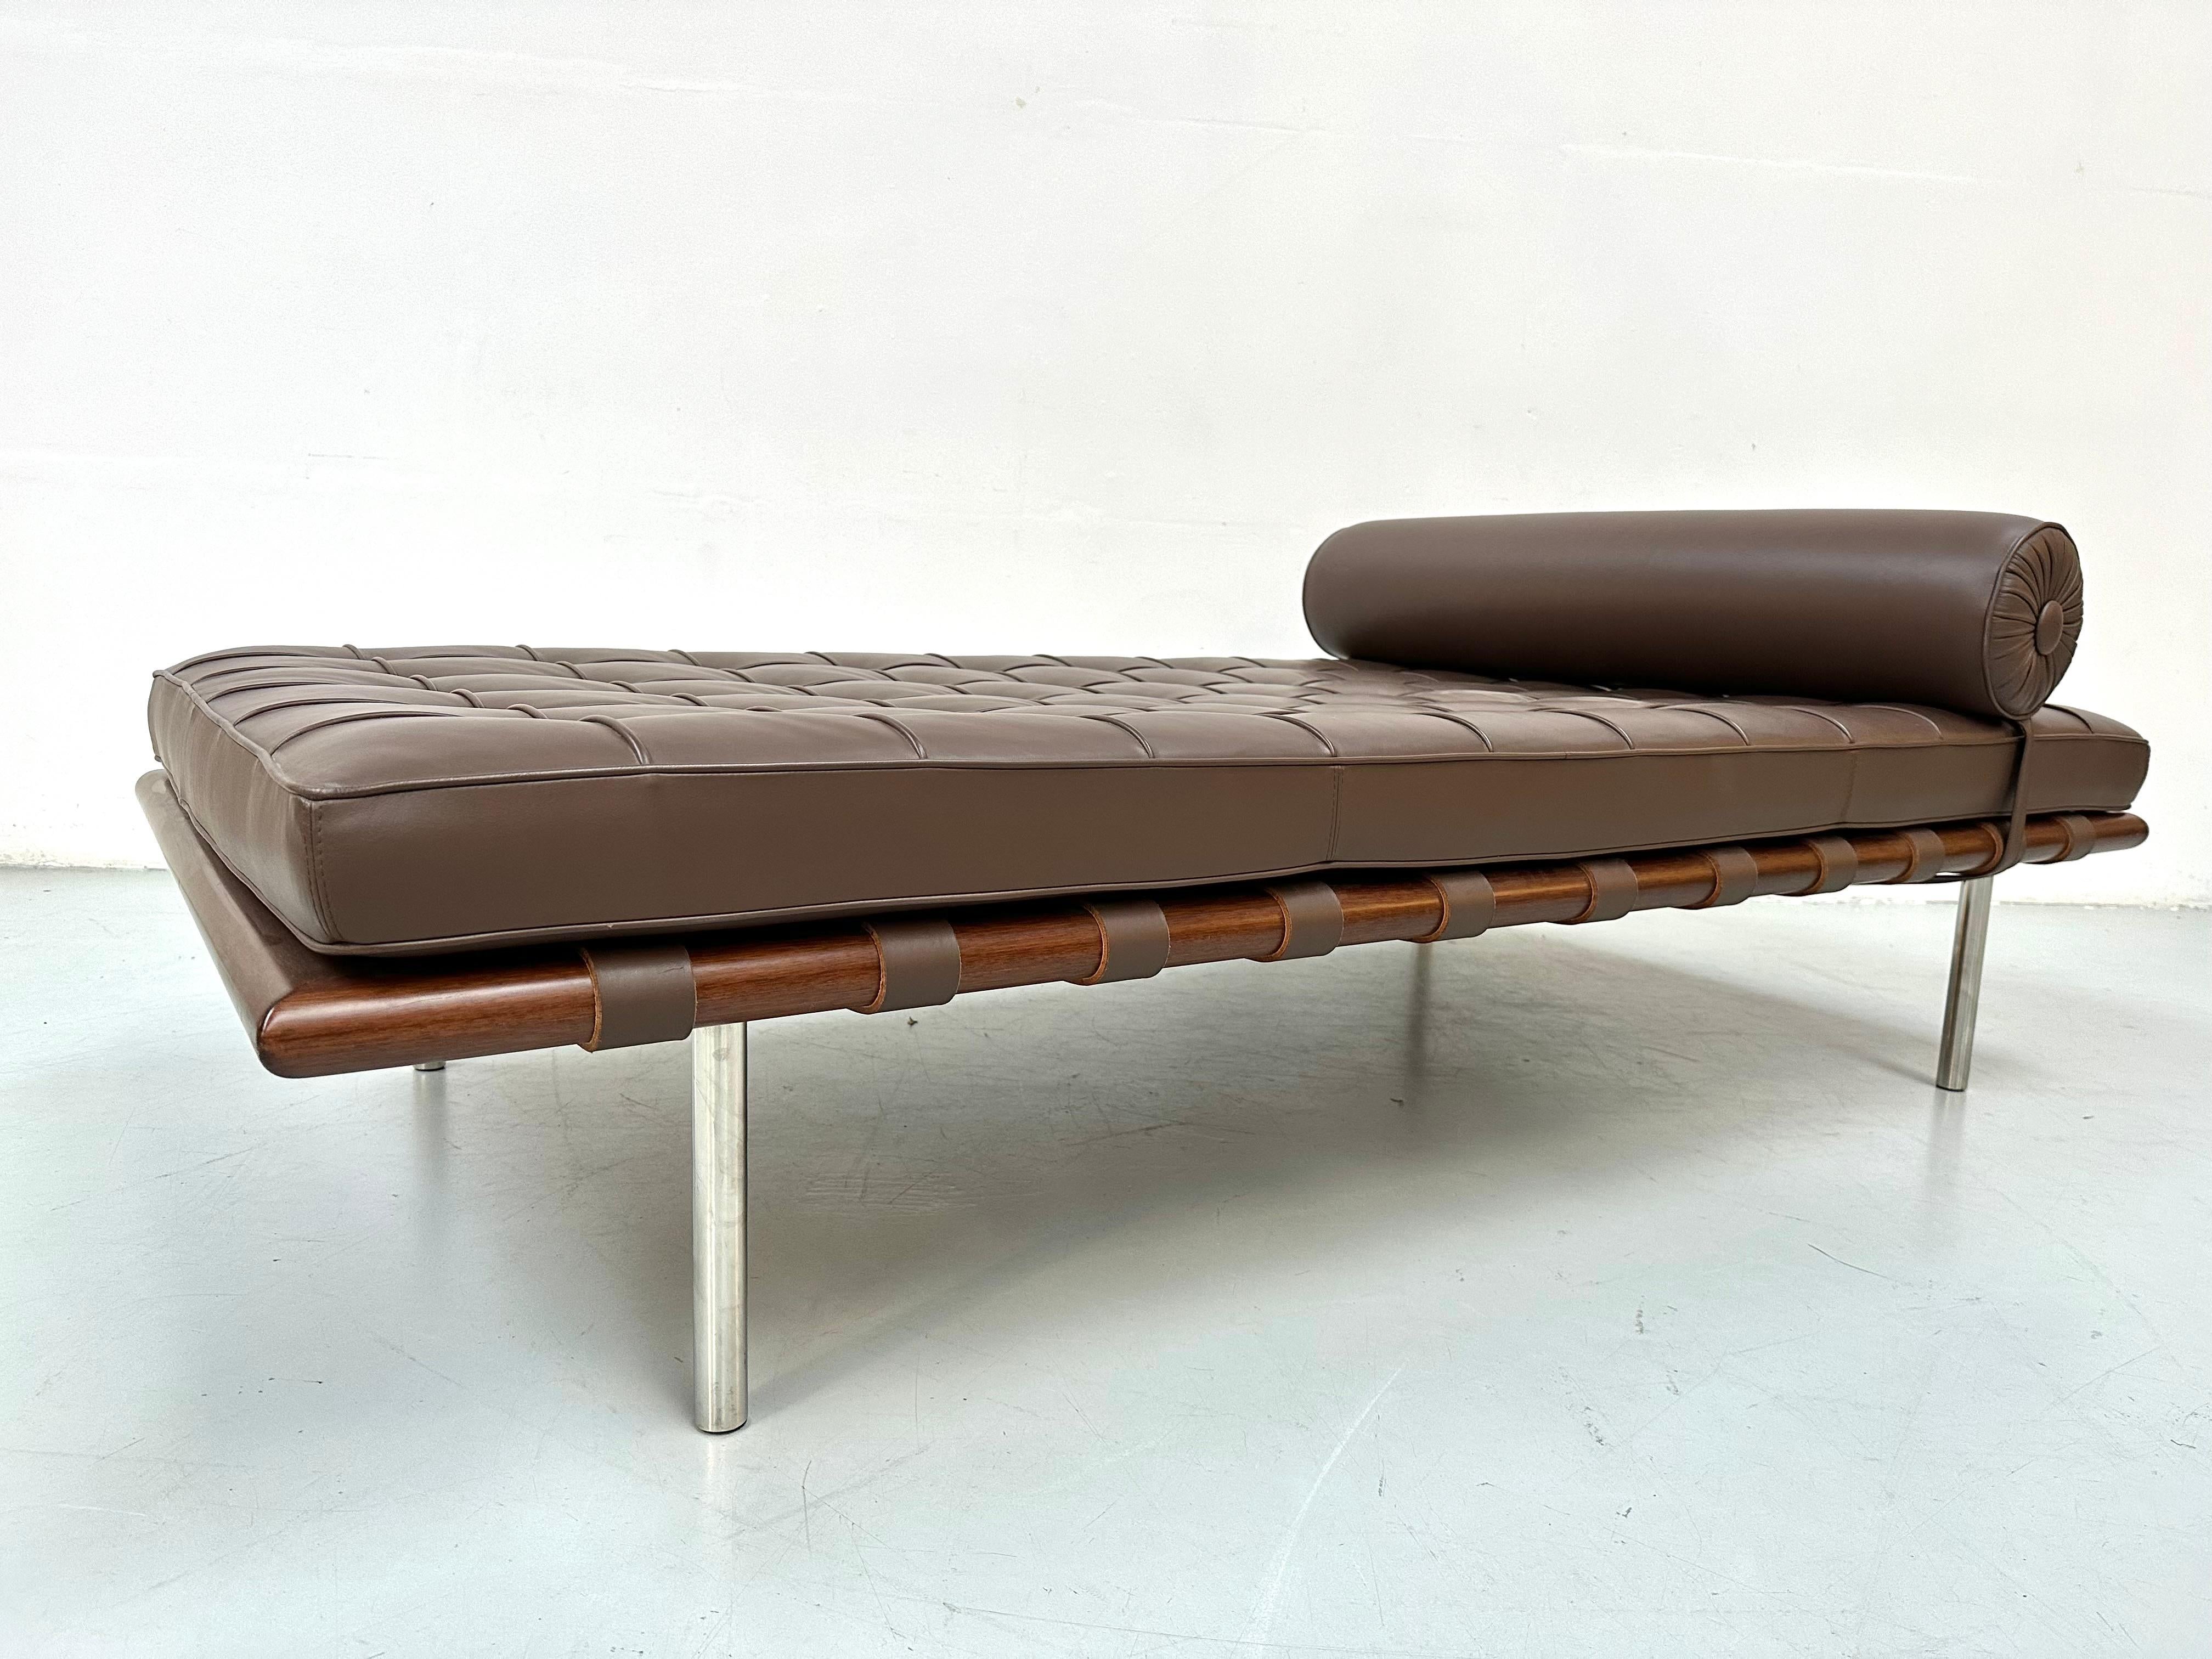 Barcelona Daybed in Brown Leather by Ludwig Mies van der Rohe for Knoll, 1980s. For Sale 2